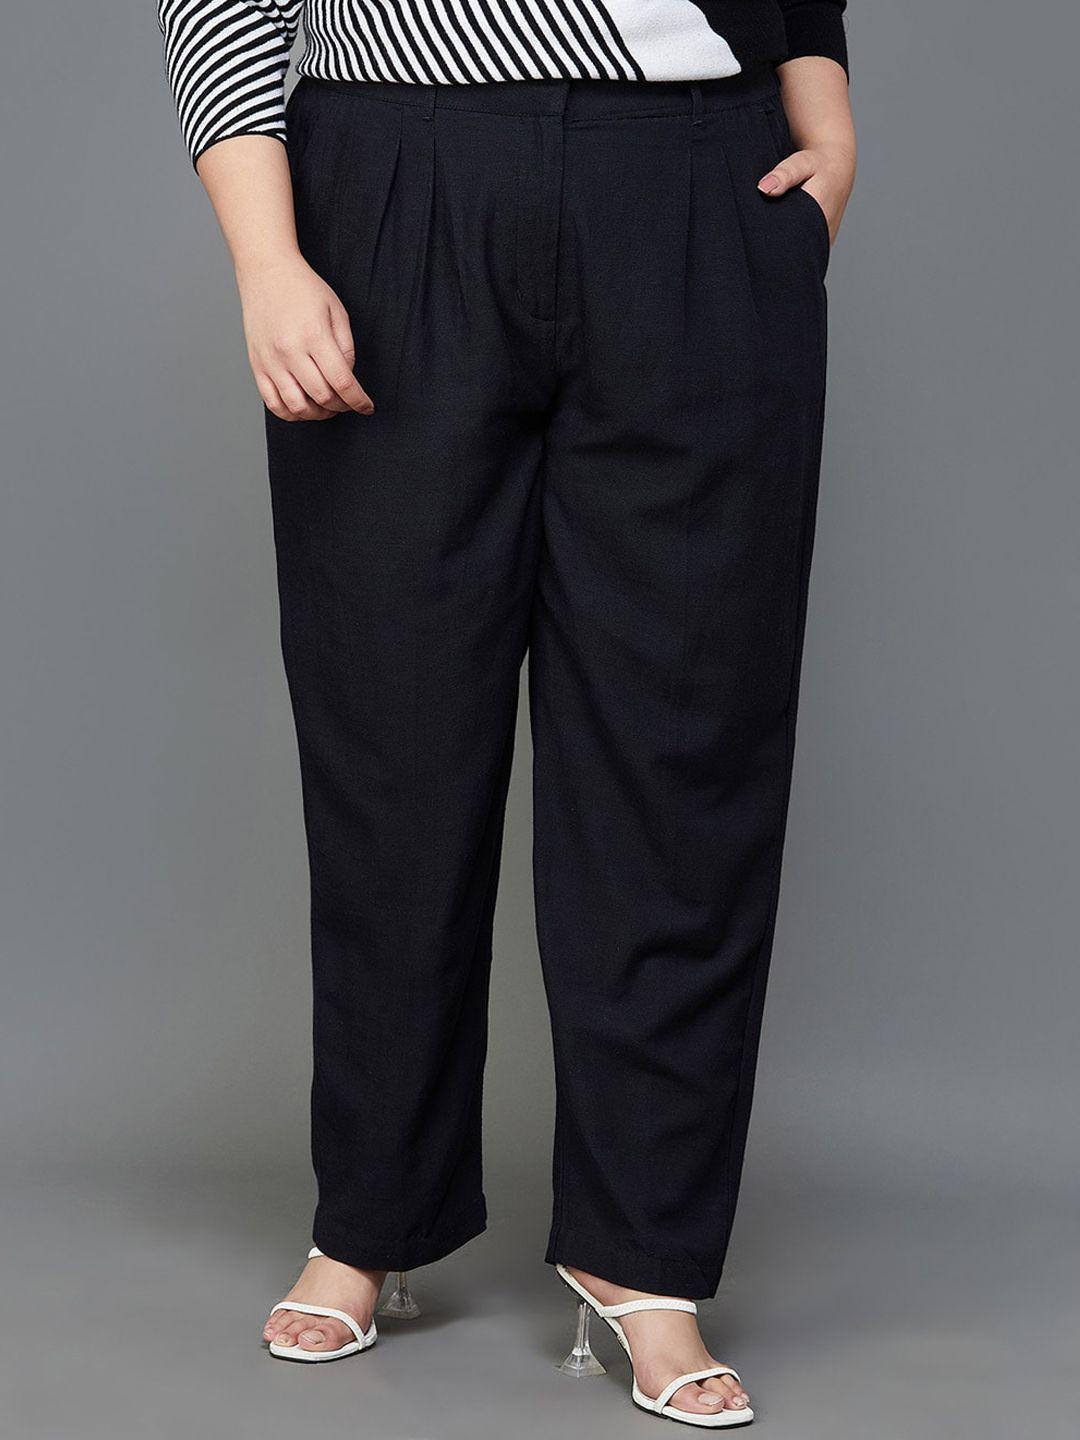 nexus women mid- rise pleated parallel trousers